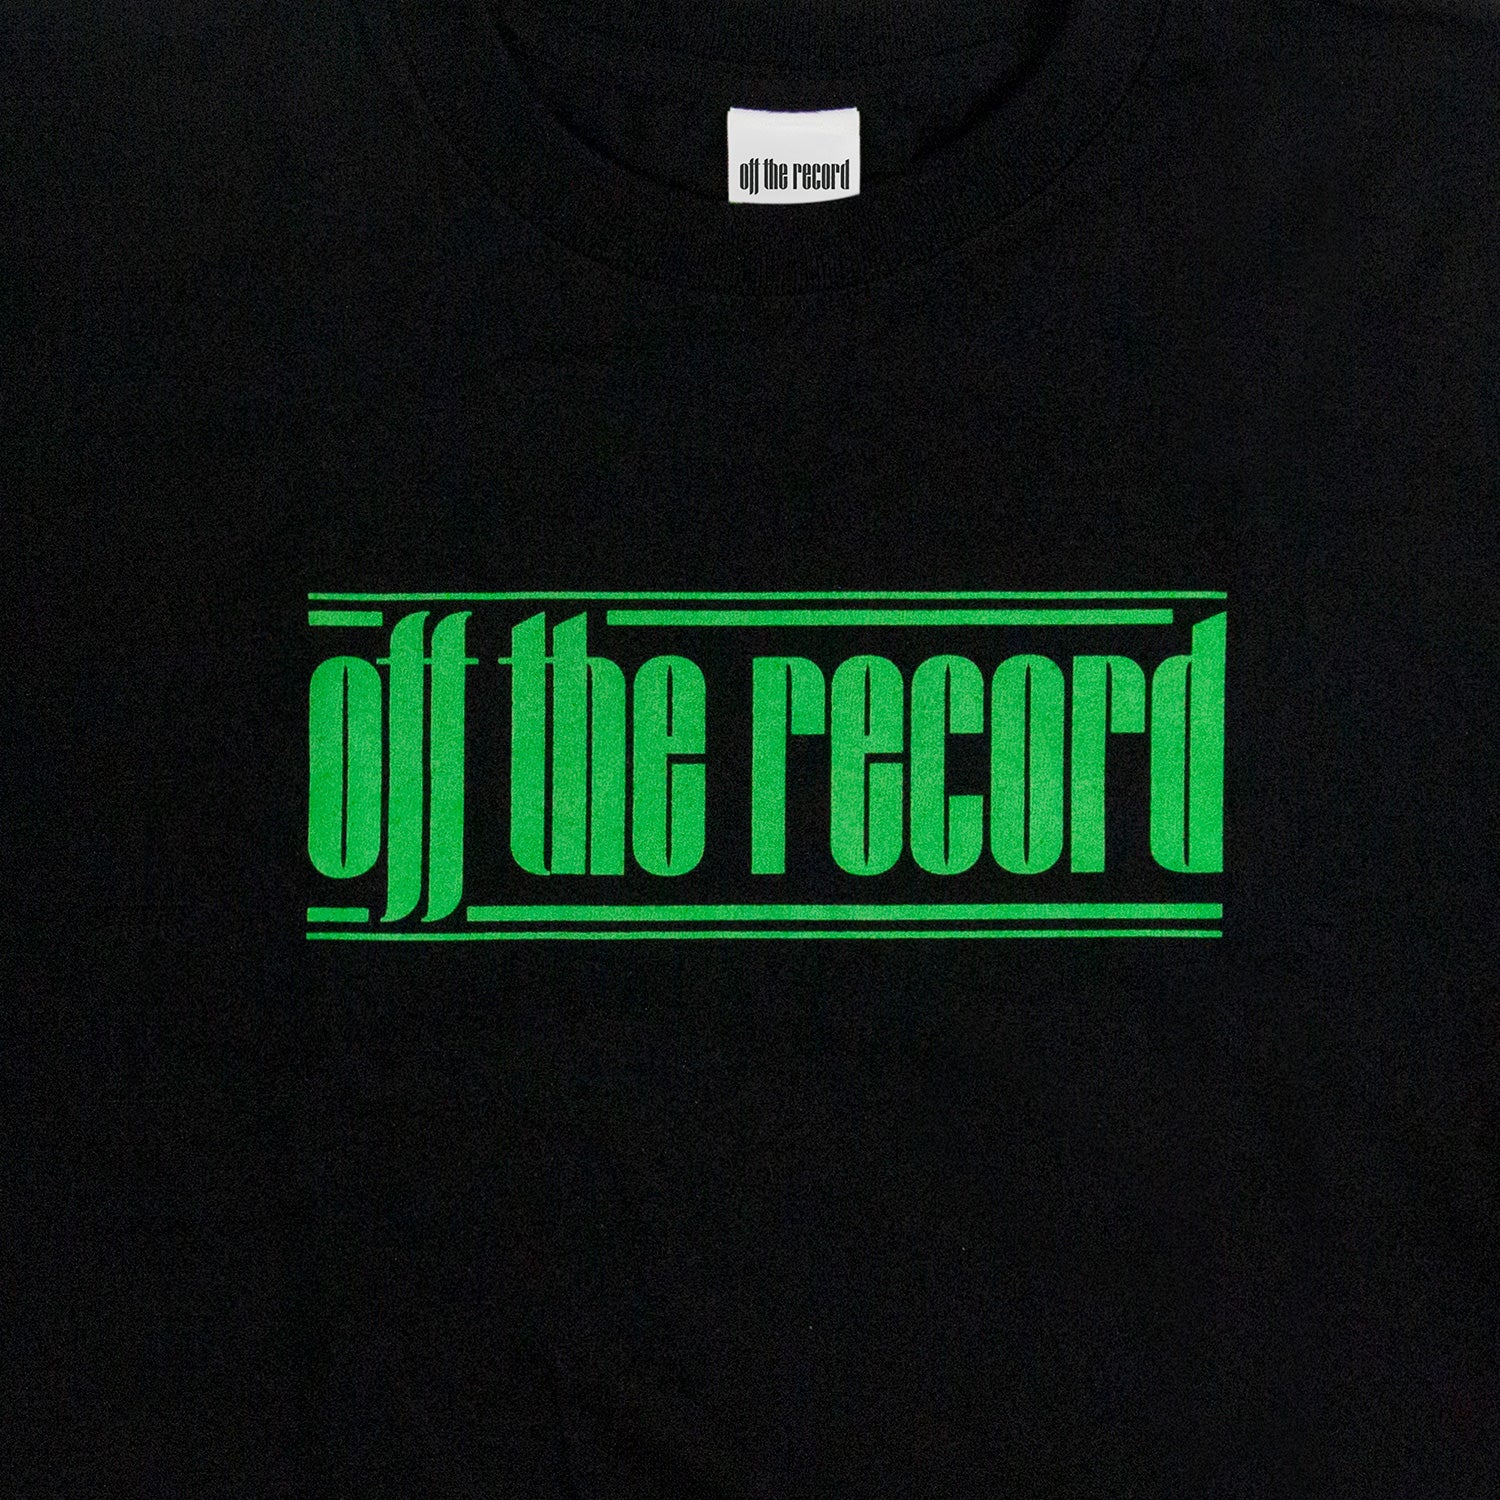 T-SHIRT【XL】 / WOOYOUNG (From 2PM)『Off the record』